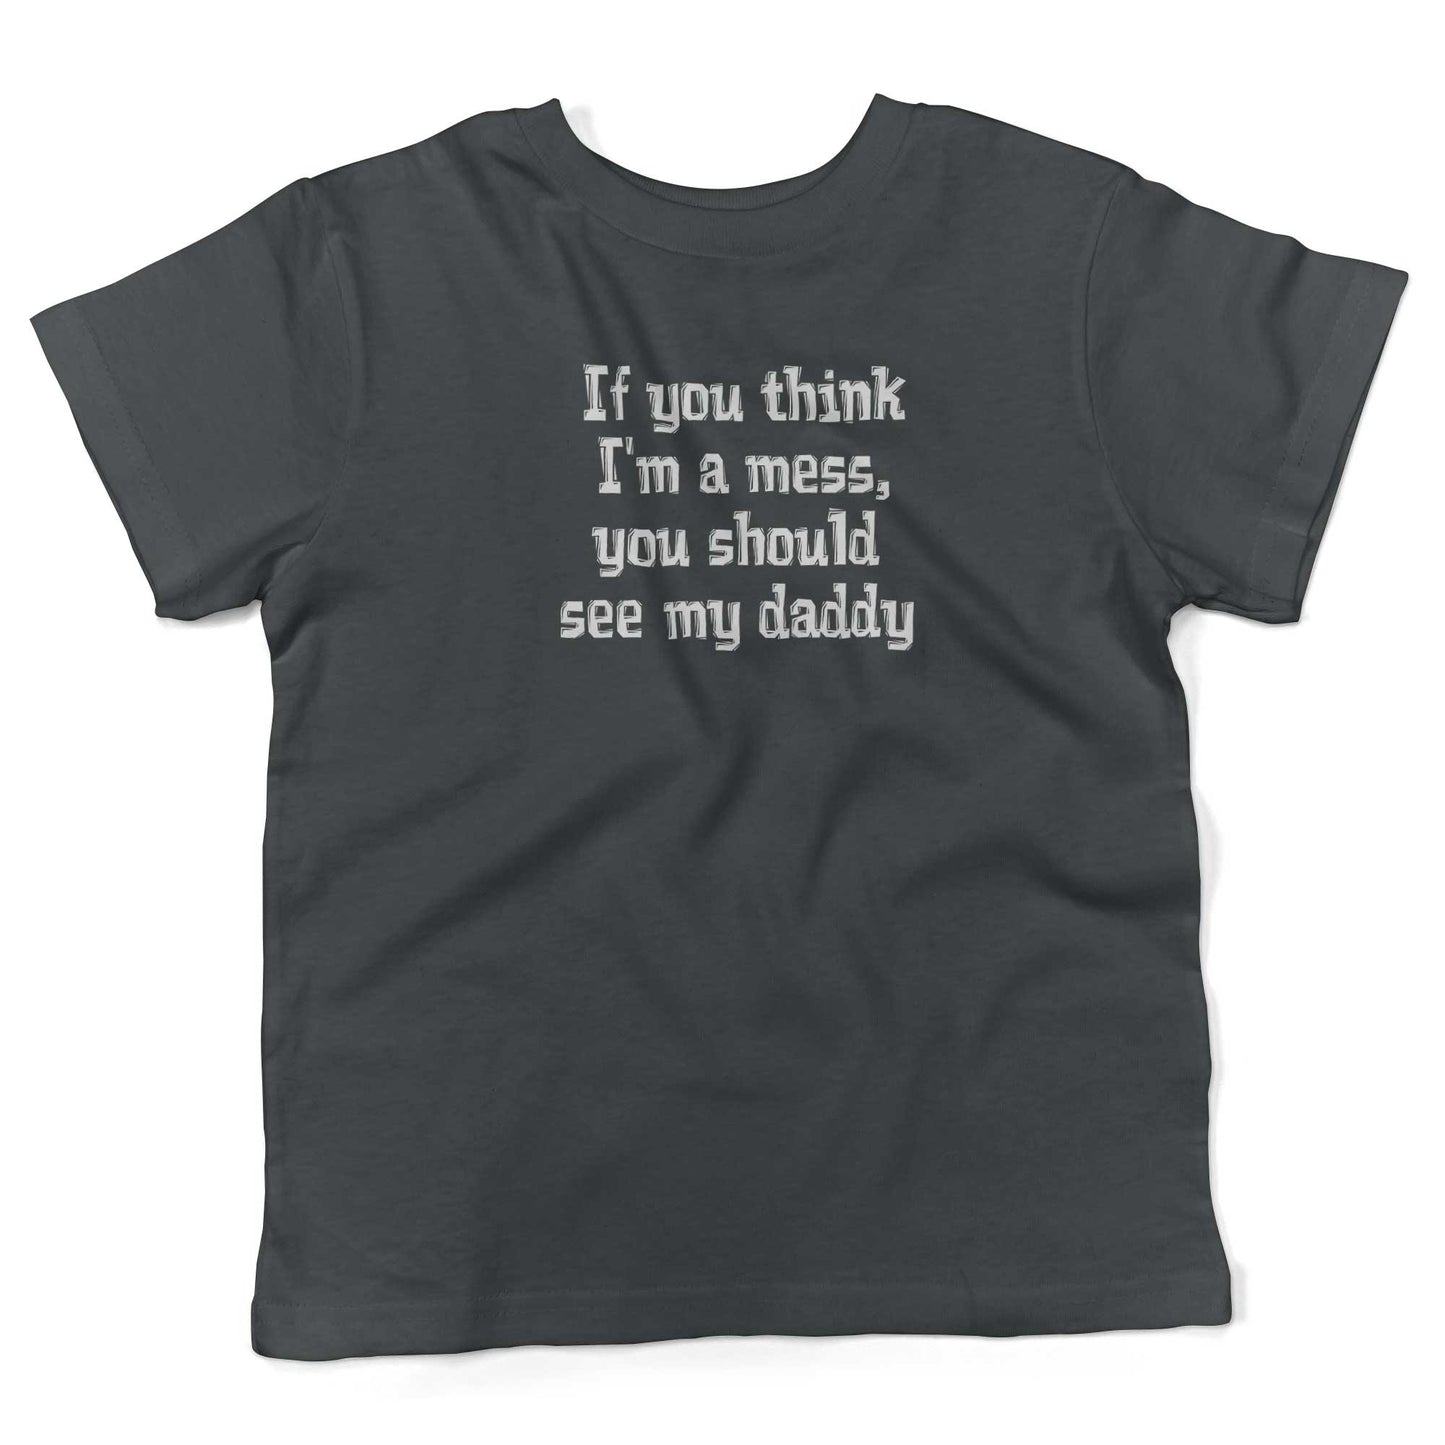 If You Think I'm A Mess, You Should See My Daddy Toddler Shirt-Asphalt-2T